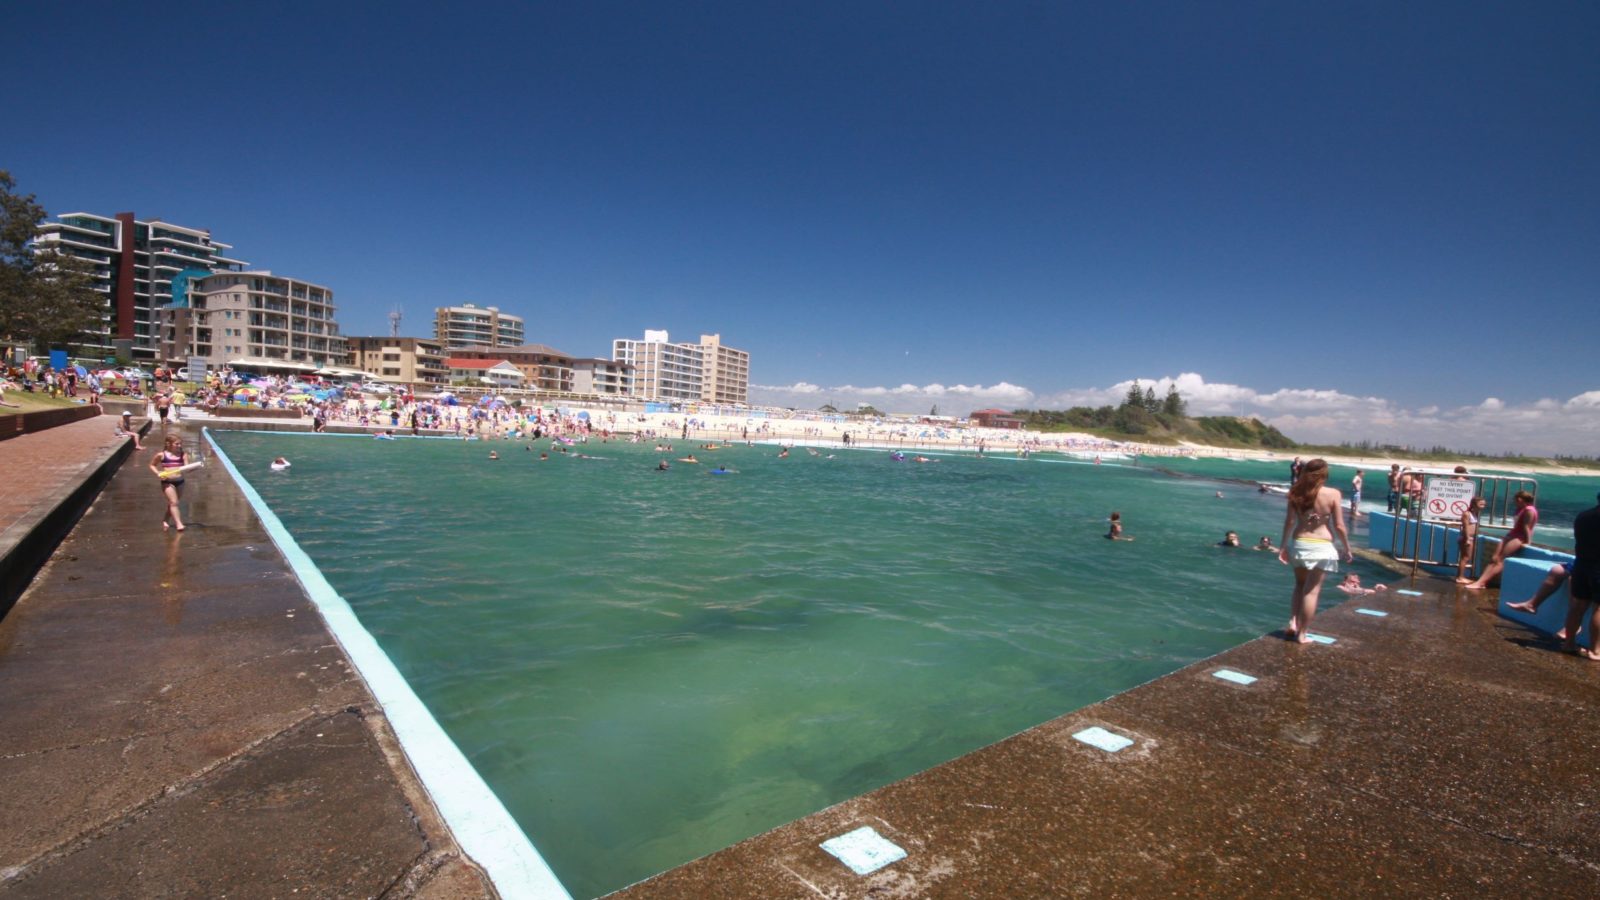 Forster Ocean baths, also known as the Bullring